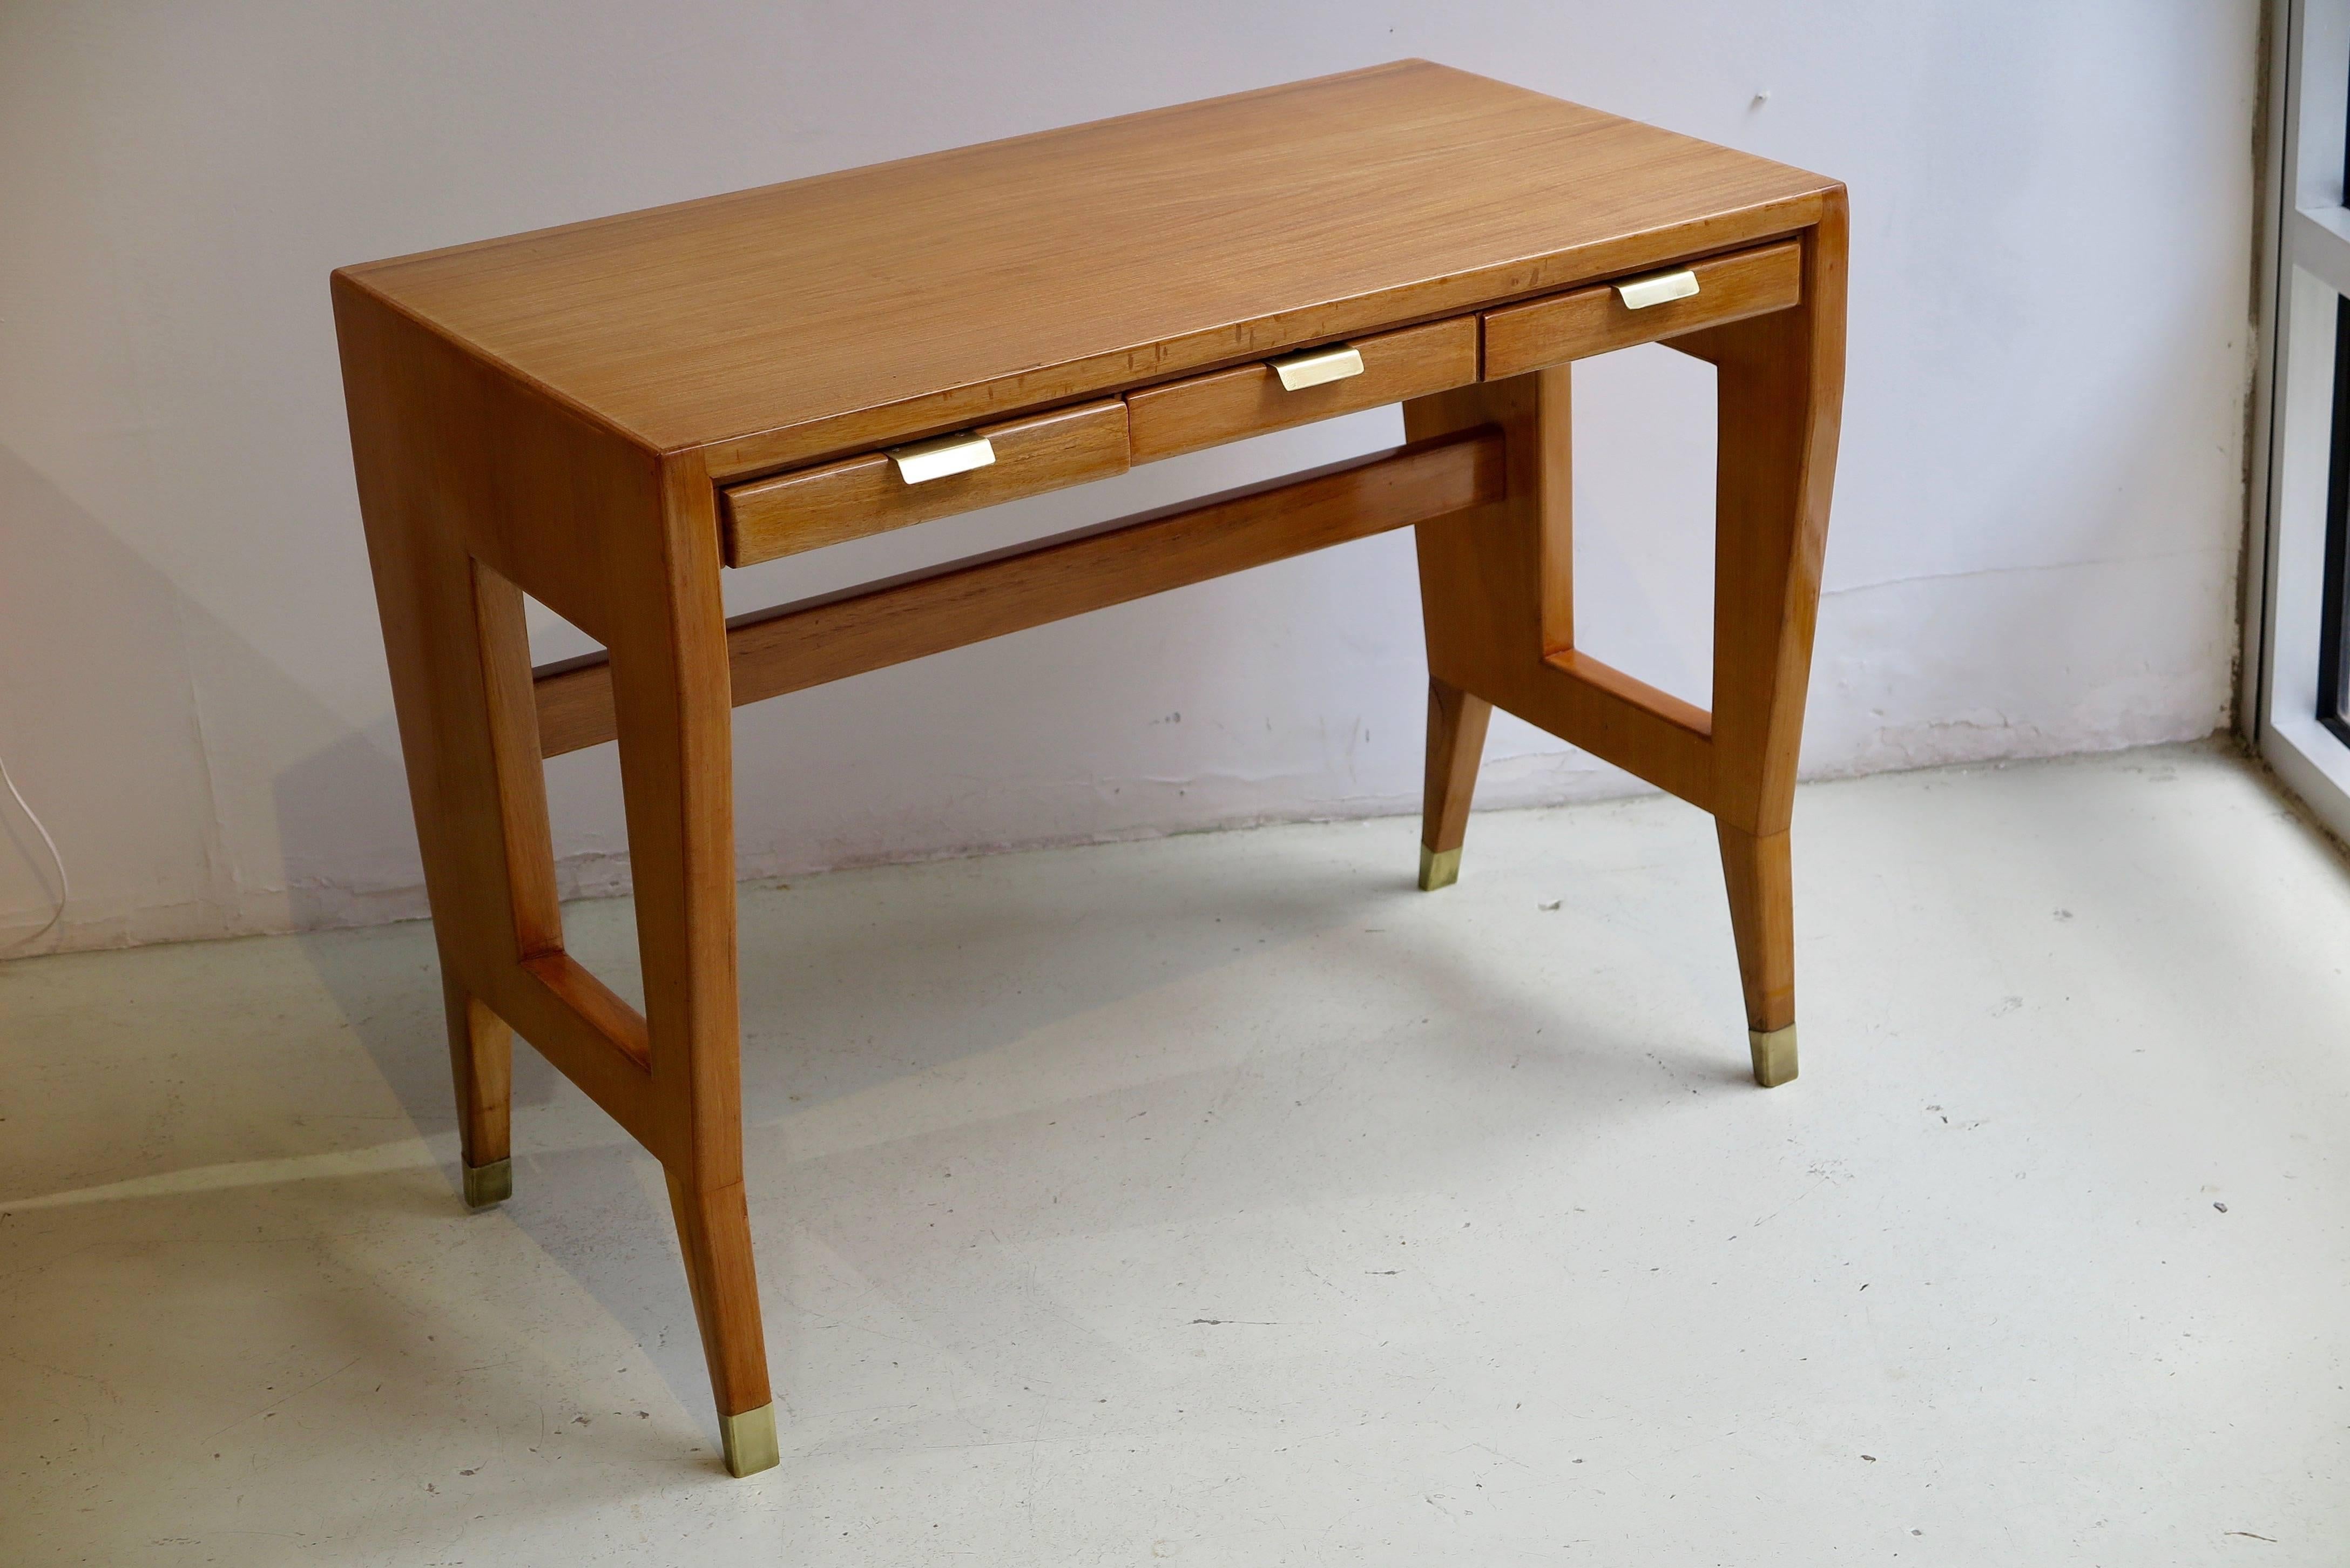 Pair of desks or tables in ash with three drawers and handles and feet in brass by Gio Ponti (1891 - 1971), Italy, circa 1940. The desks were at the Banca Nazionale del Lavoro in Bergamo, Italy.
Comes with letter of authenticity from the Gio Ponti